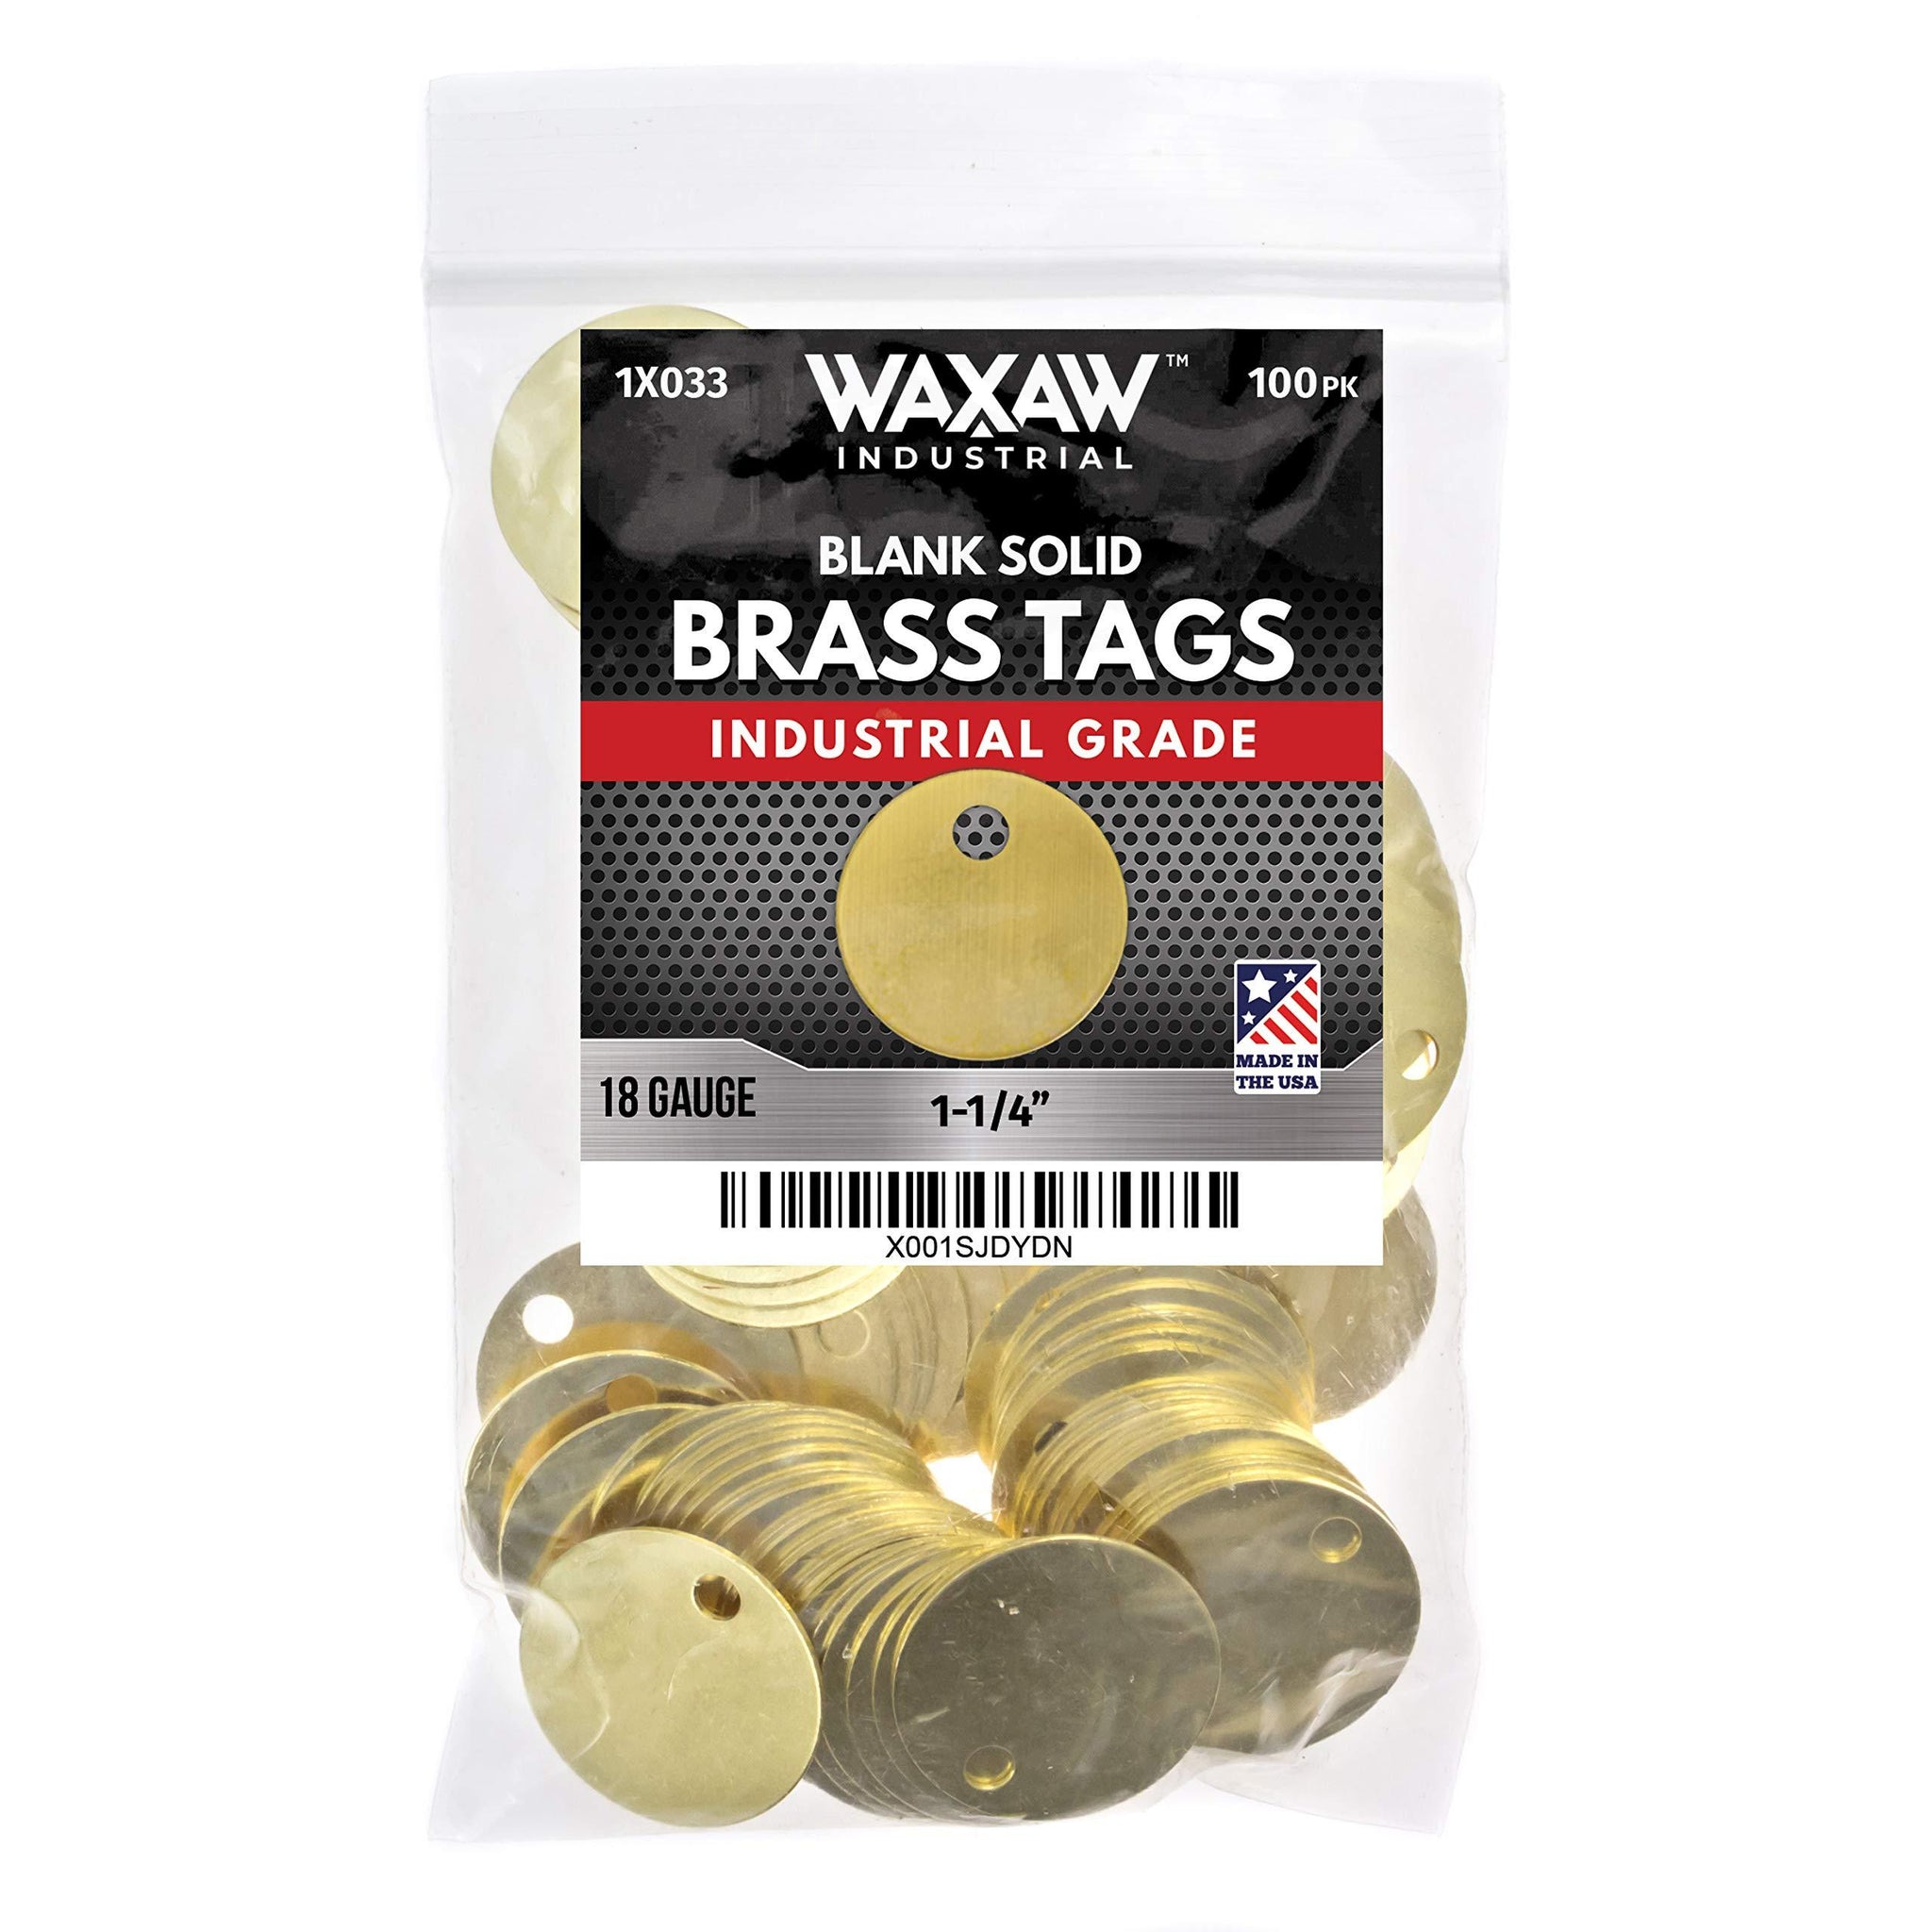 1.25u201d Solid Brass Stamping Tags Industrial Grade (0.040") Blank Chits for Pipe Valves, Tool Check-Out and Equipment Labeling | Made in USA (100 Pack)